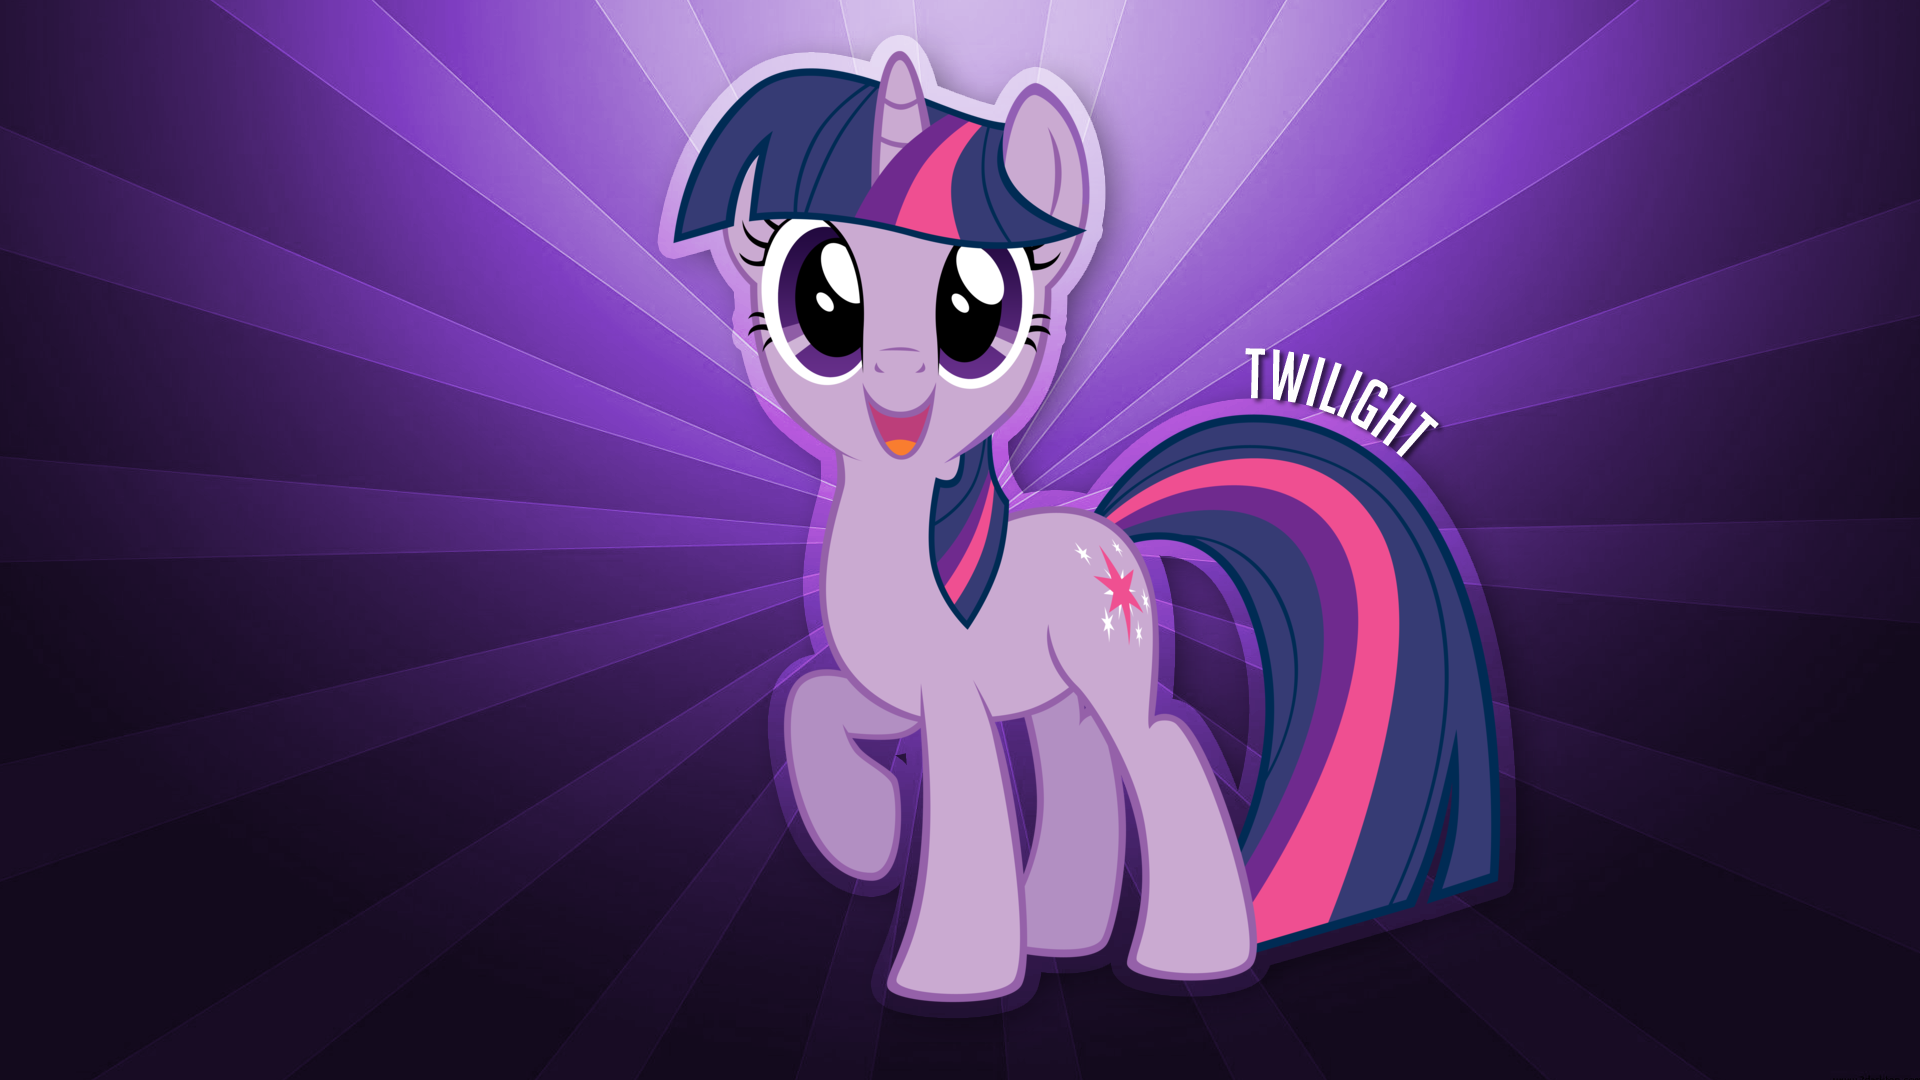 Twilight Sparkle Wallpaper by MaximillianVeers and Moldypotato